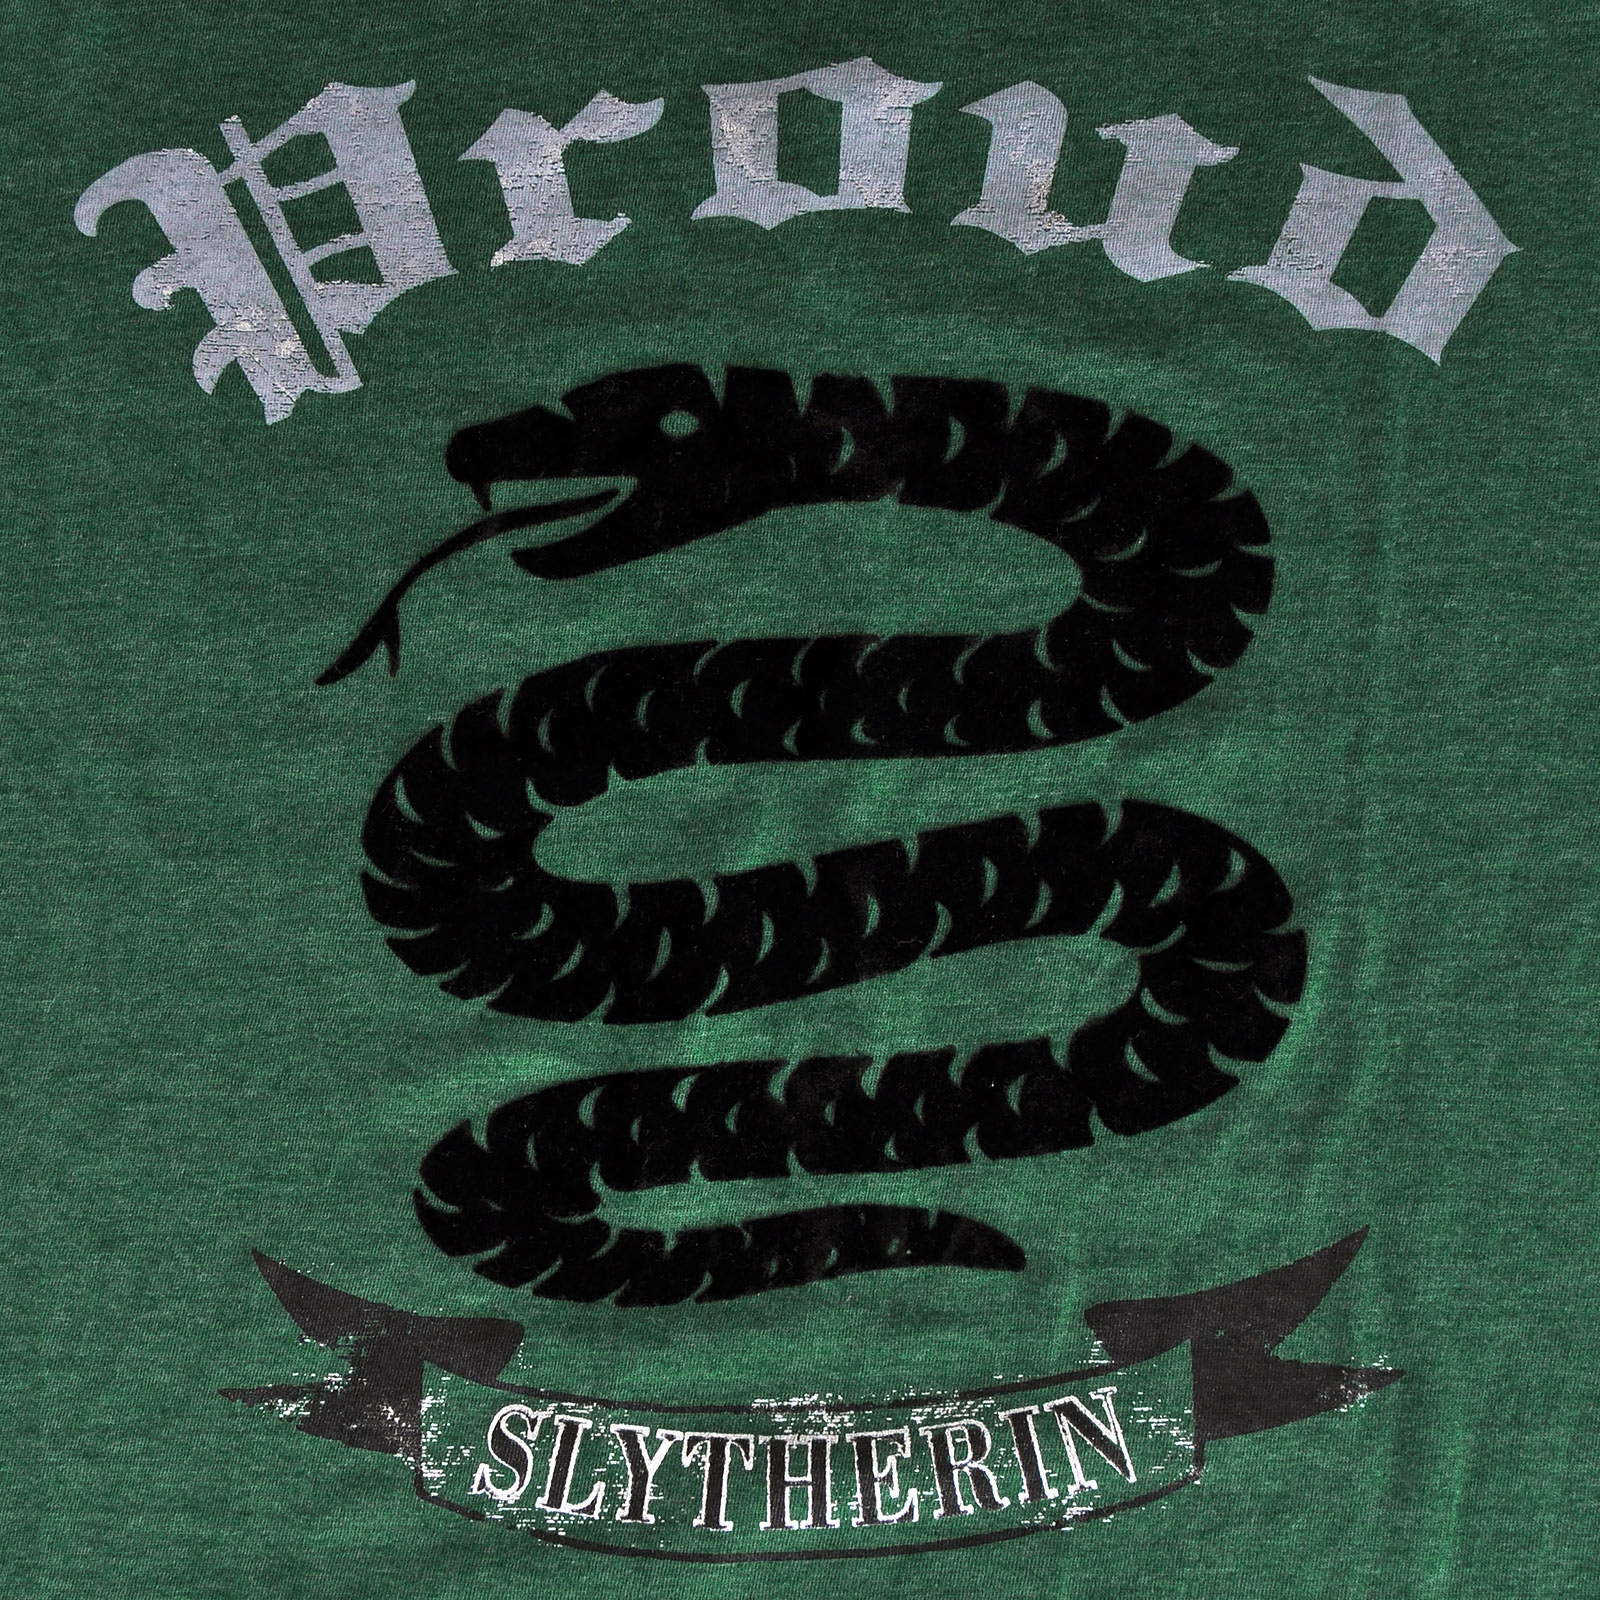 Harry Potter - Proud Slytherin T-Shirt green